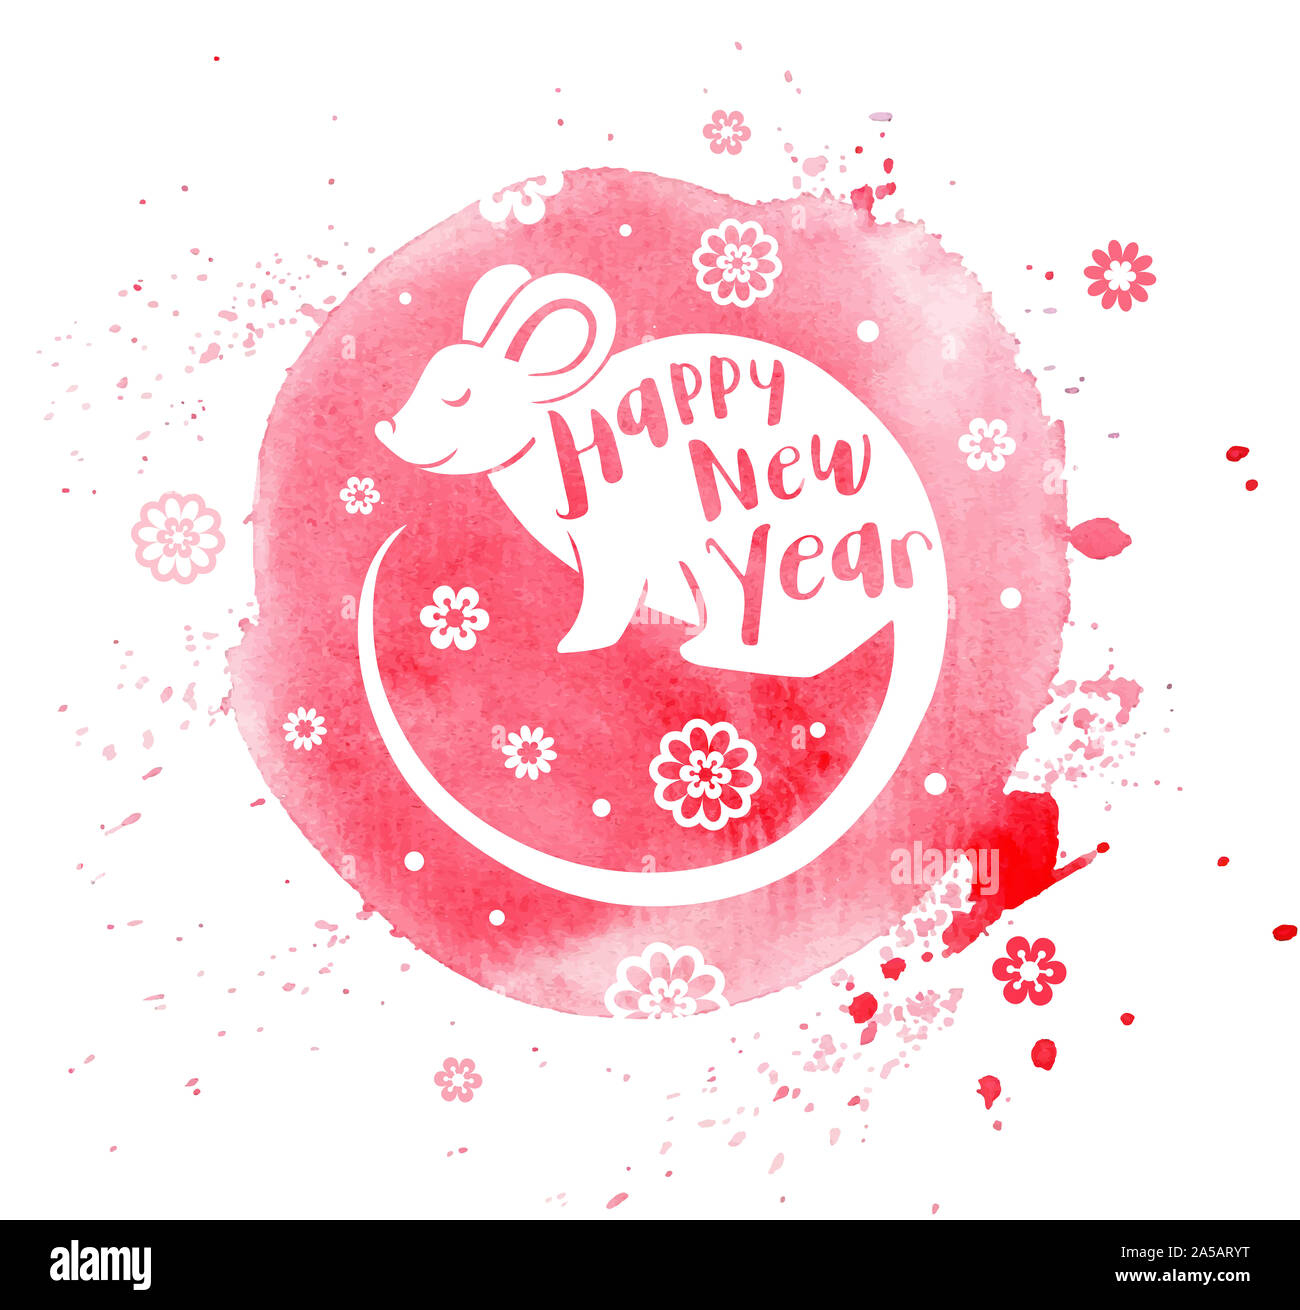 Cute rat symbol of Chinese zodiac for 2020 new year. Silhouette of rat and lettering on a pink watercolor background. Stock Photo